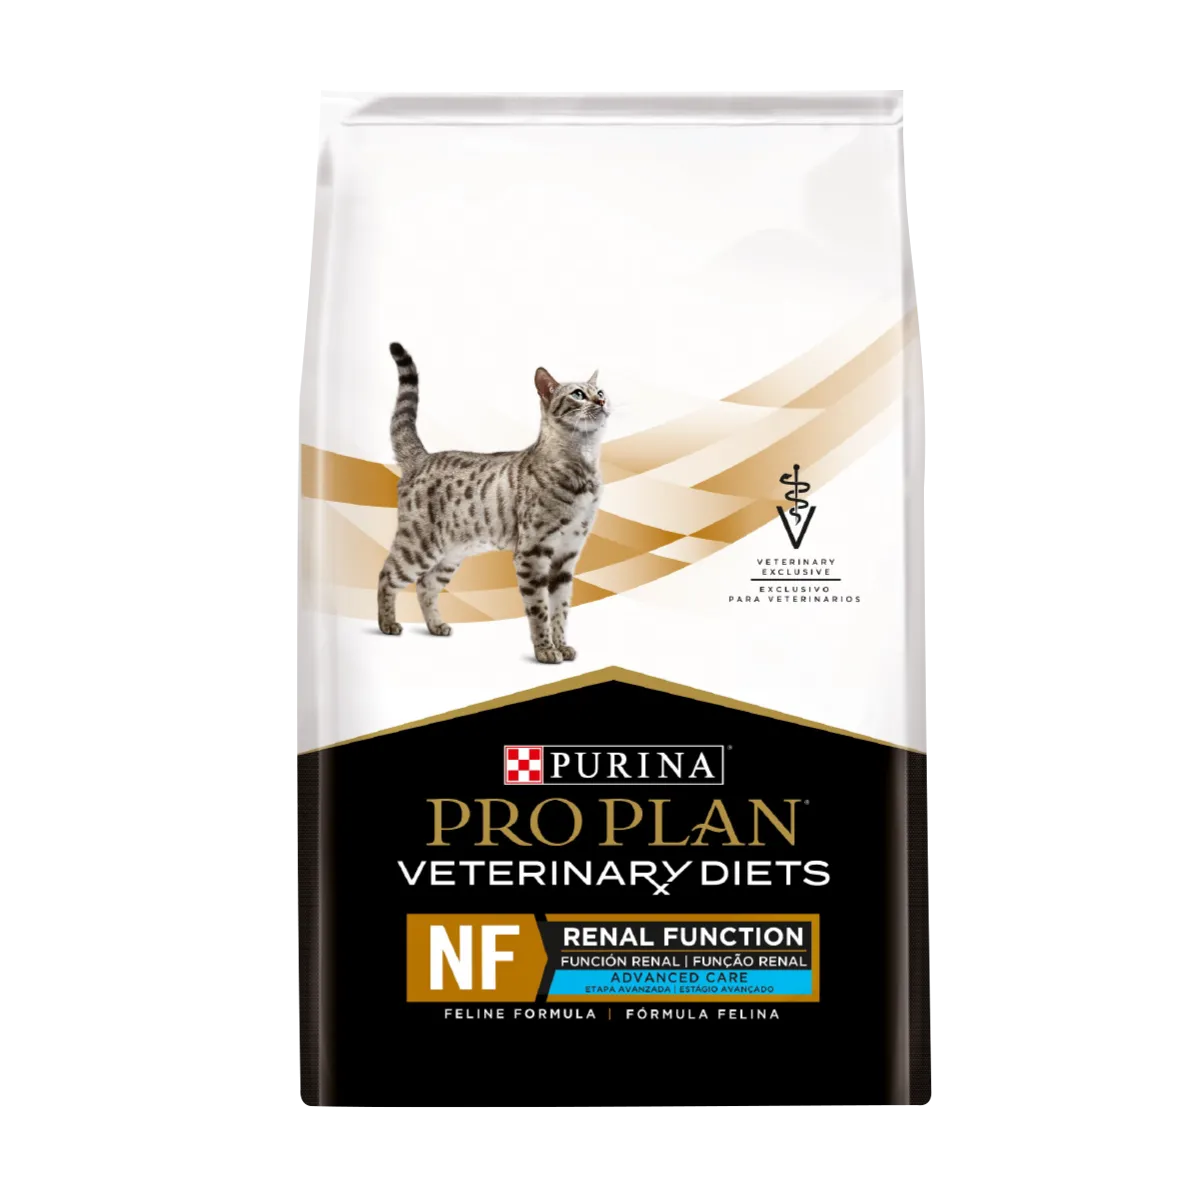 purina-pro-plan-veterinay-diets-cat-nf-renal-function-advanced-care.png.webp